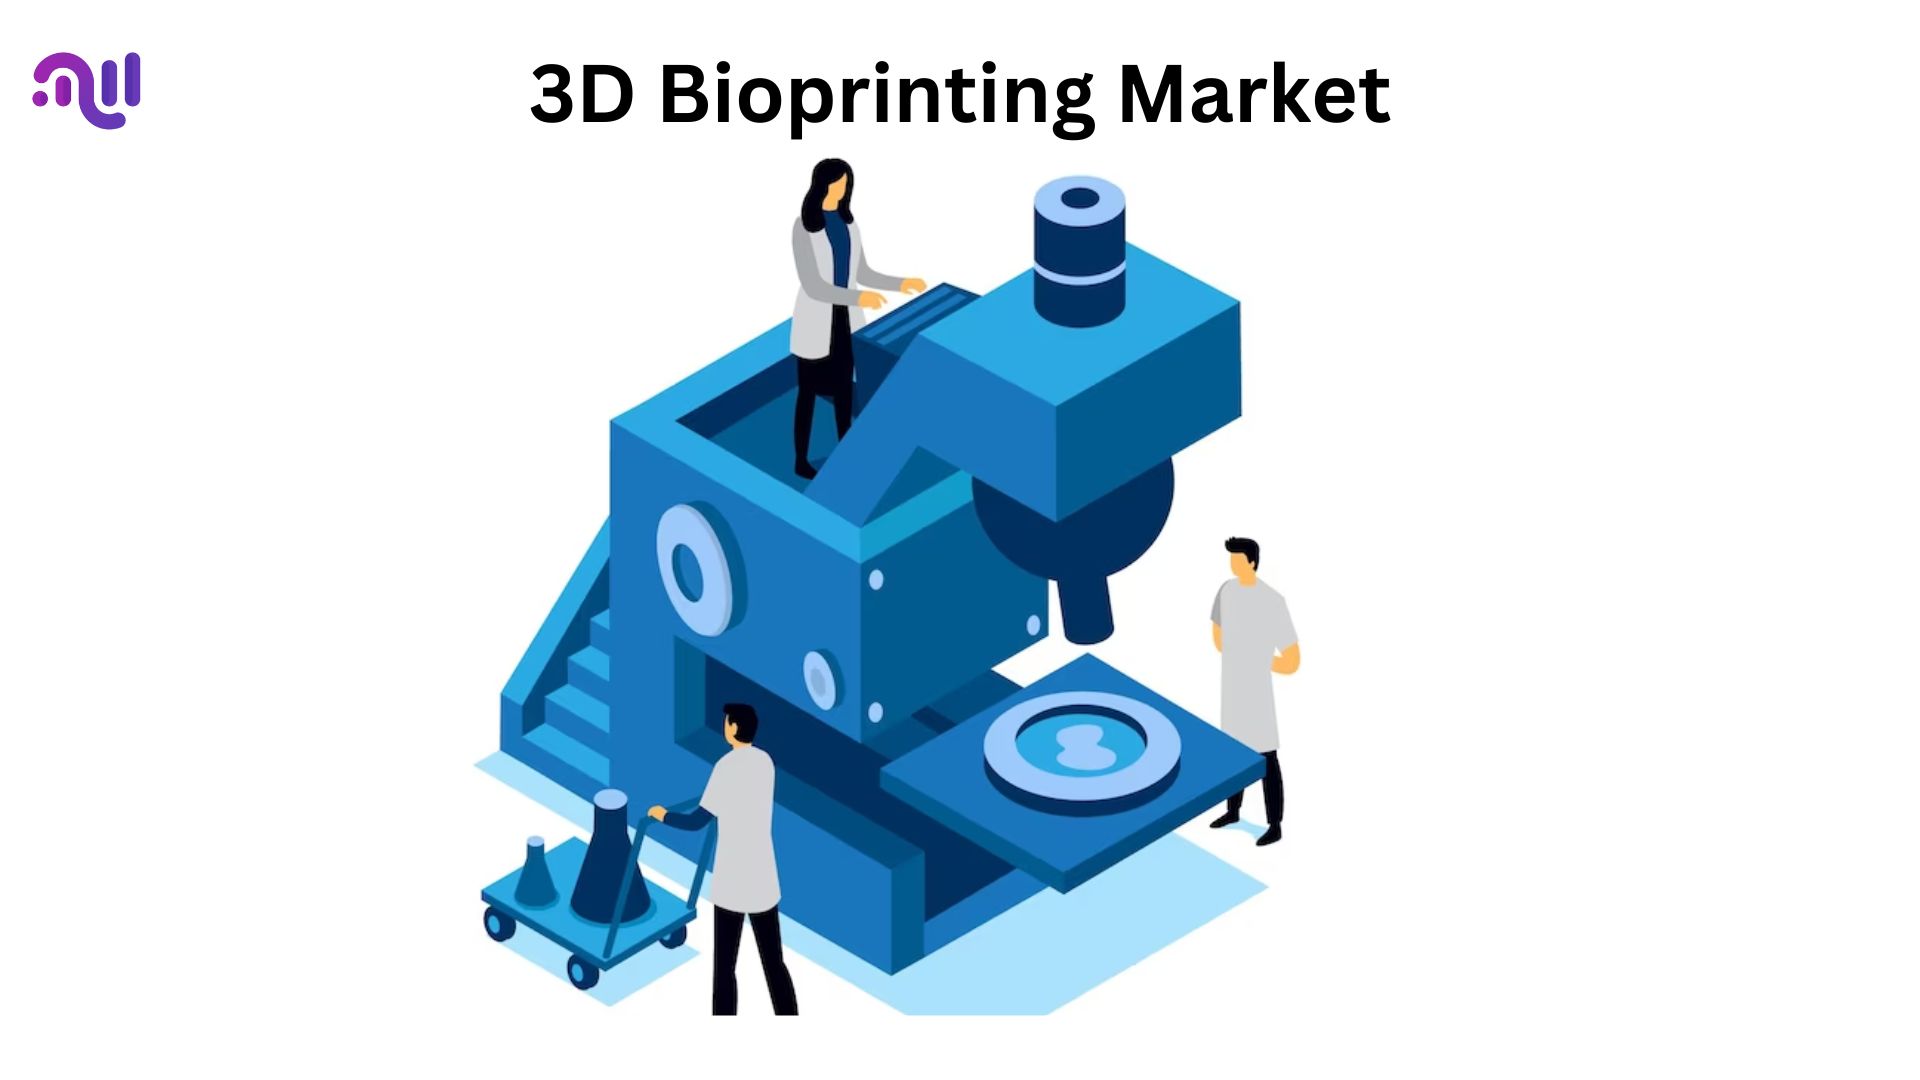 3D Bioprinting Market Is Growing at 16.1% CAGR to Reach USD 6.9 Billion by 2033: Market.us Report